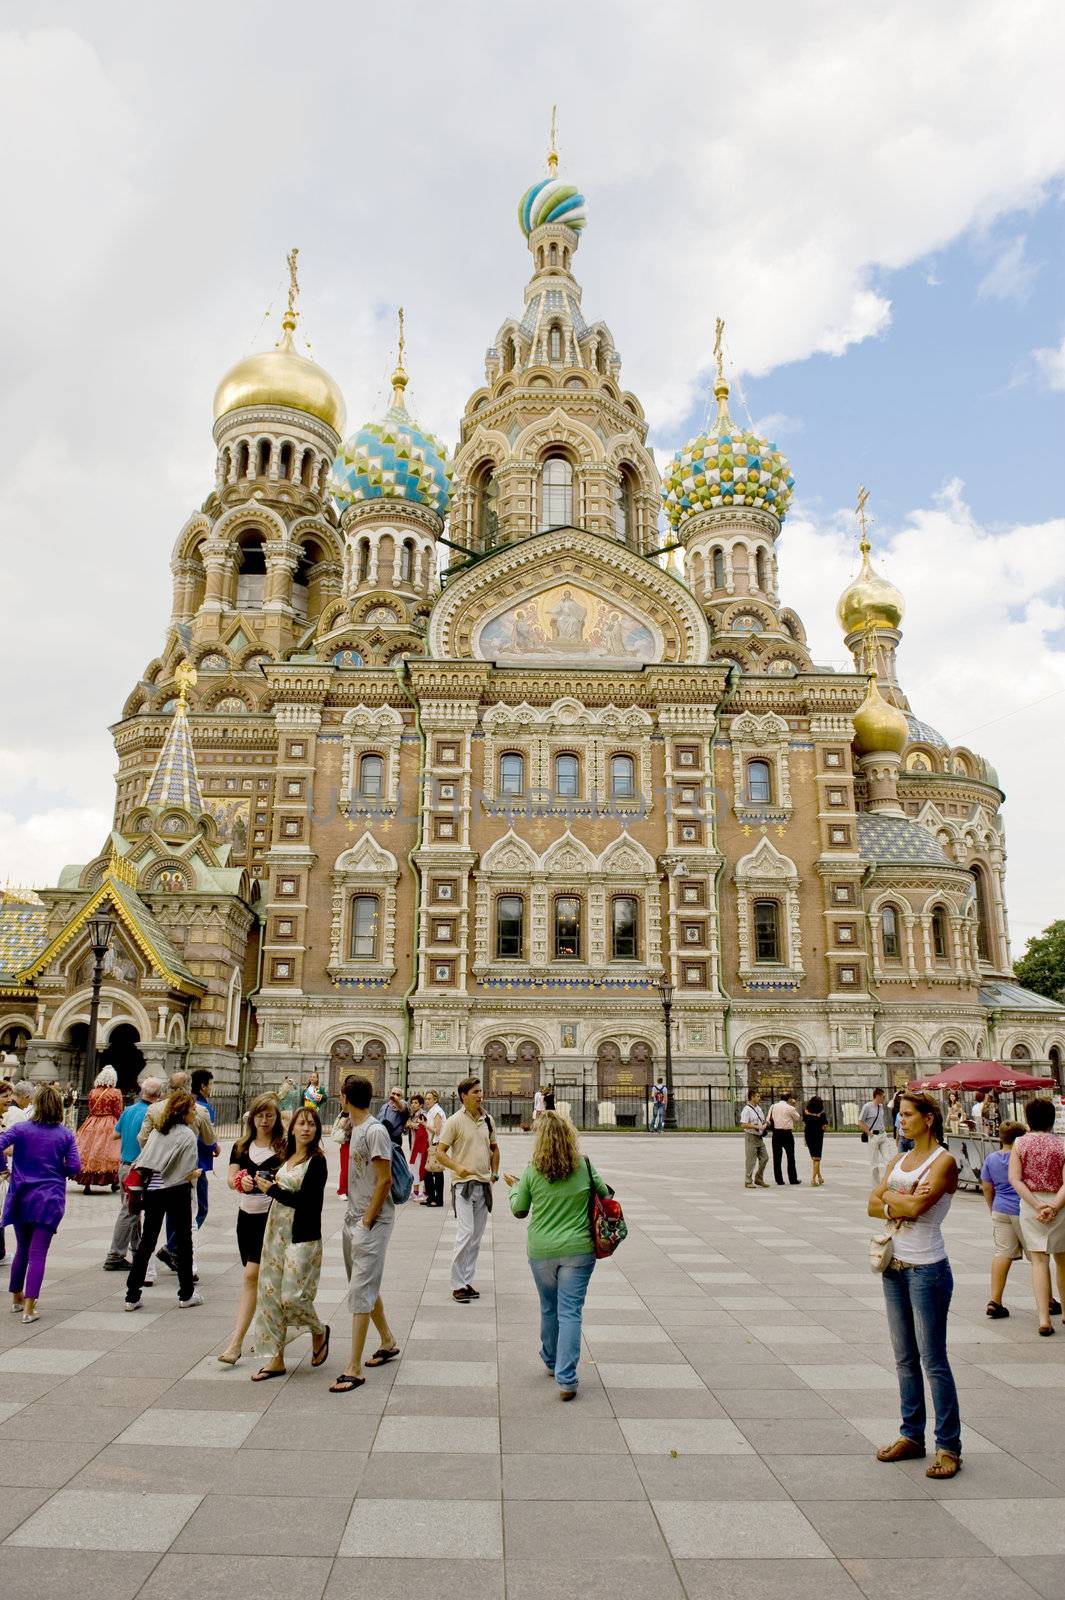 Savior on the Spilled Blood cathedral in St Petersburg, Russia